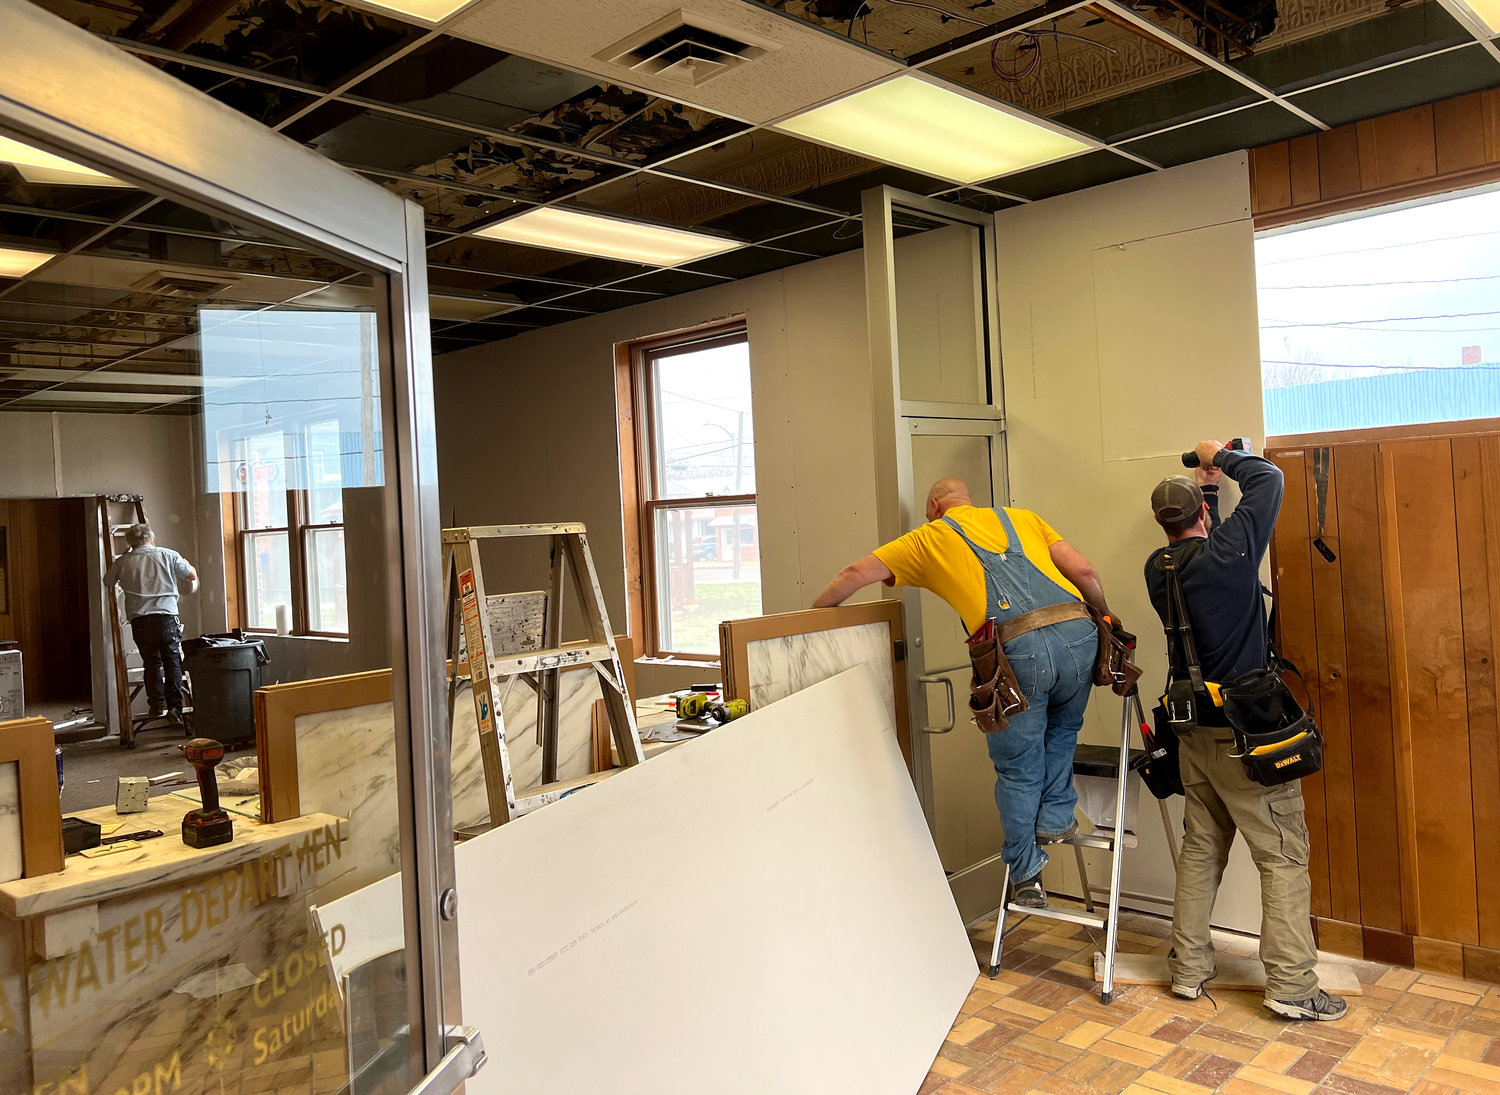 A construction crew works on the newly-hung drywall in the Democrat’s new building, 111 W. Fourth St., on Monday, March 21. The building formerly housed the Sedalia Water Department and was purchased by the Democrat in late 2021.